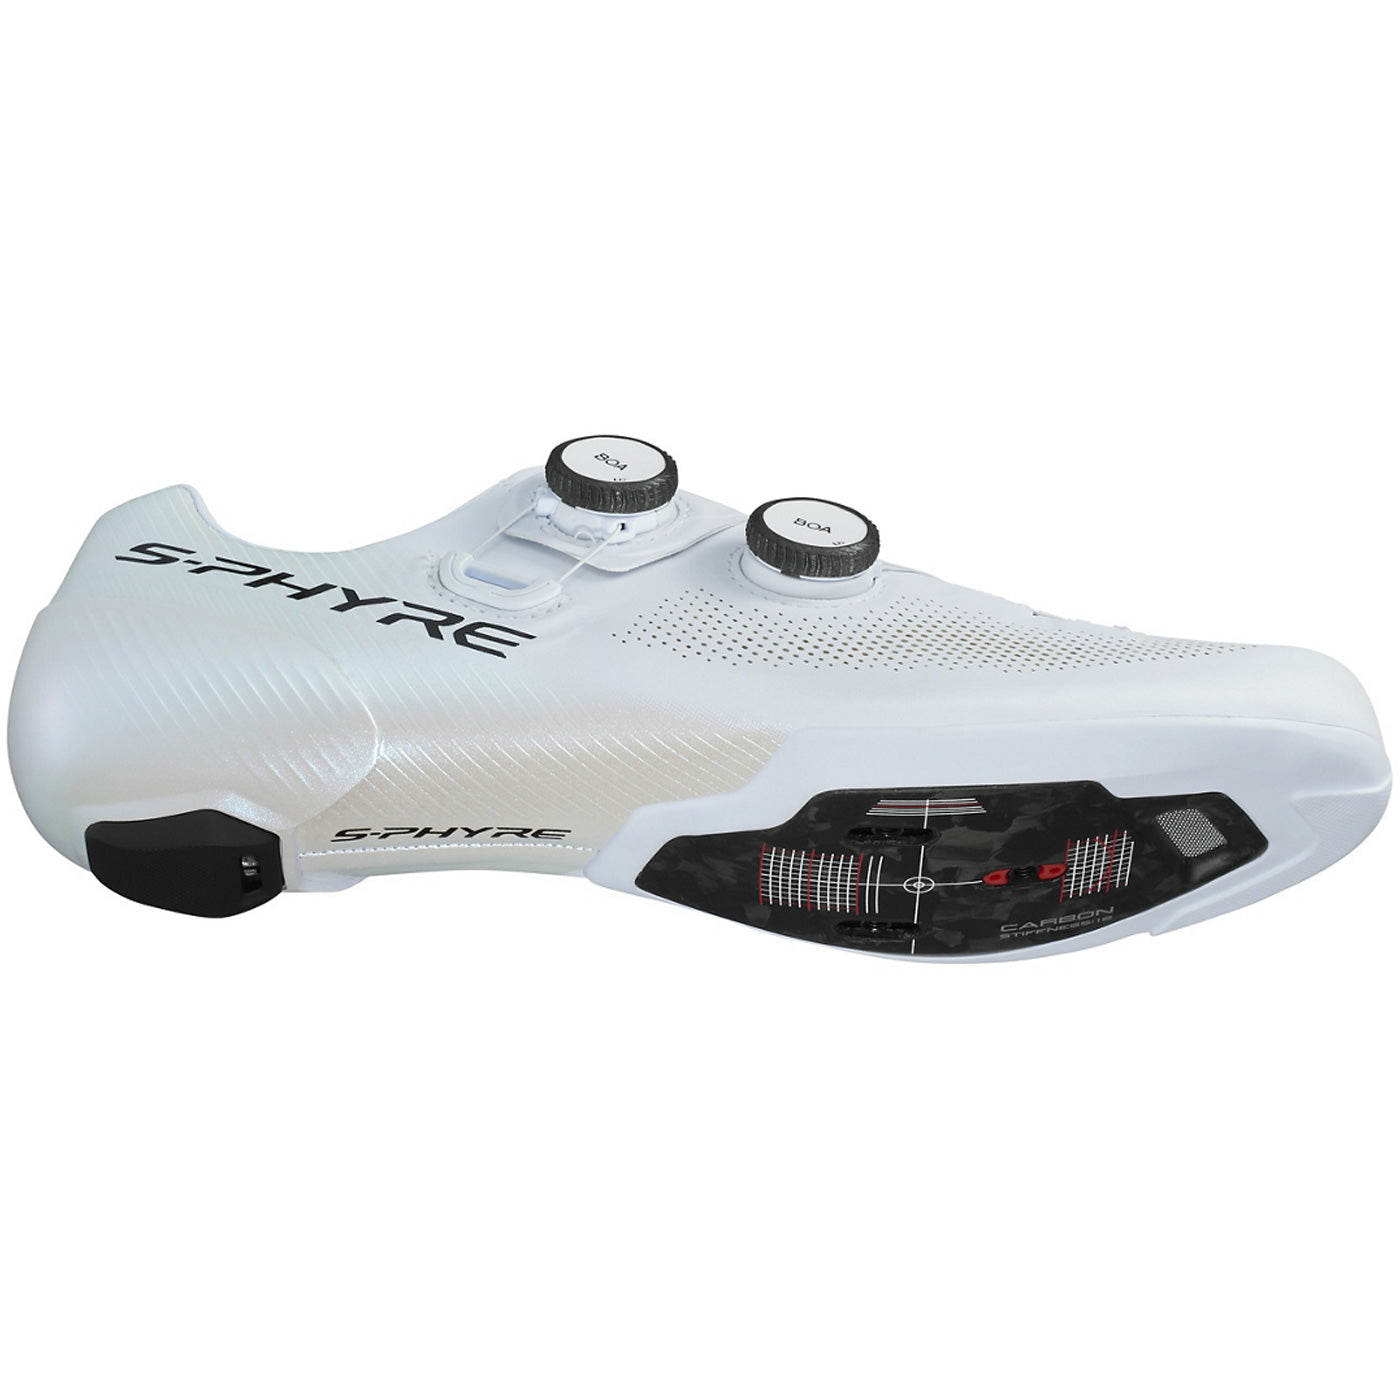 Shimano S-Phyre RC903 schuhe - Weiss